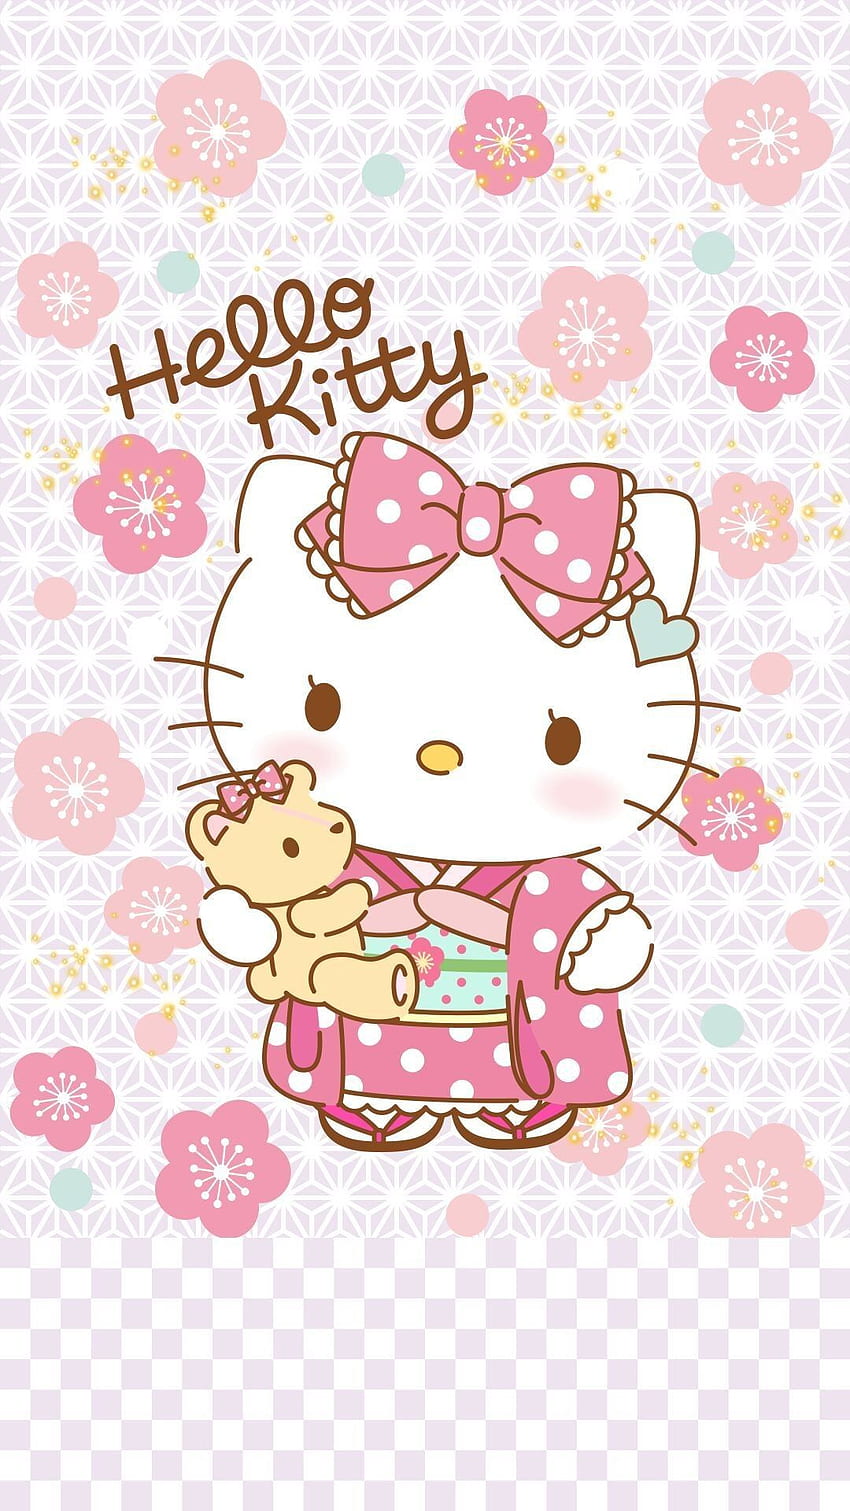 Hello kitty and friends 1080P 2K 4K 5K HD wallpapers free download   Wallpaper Flare